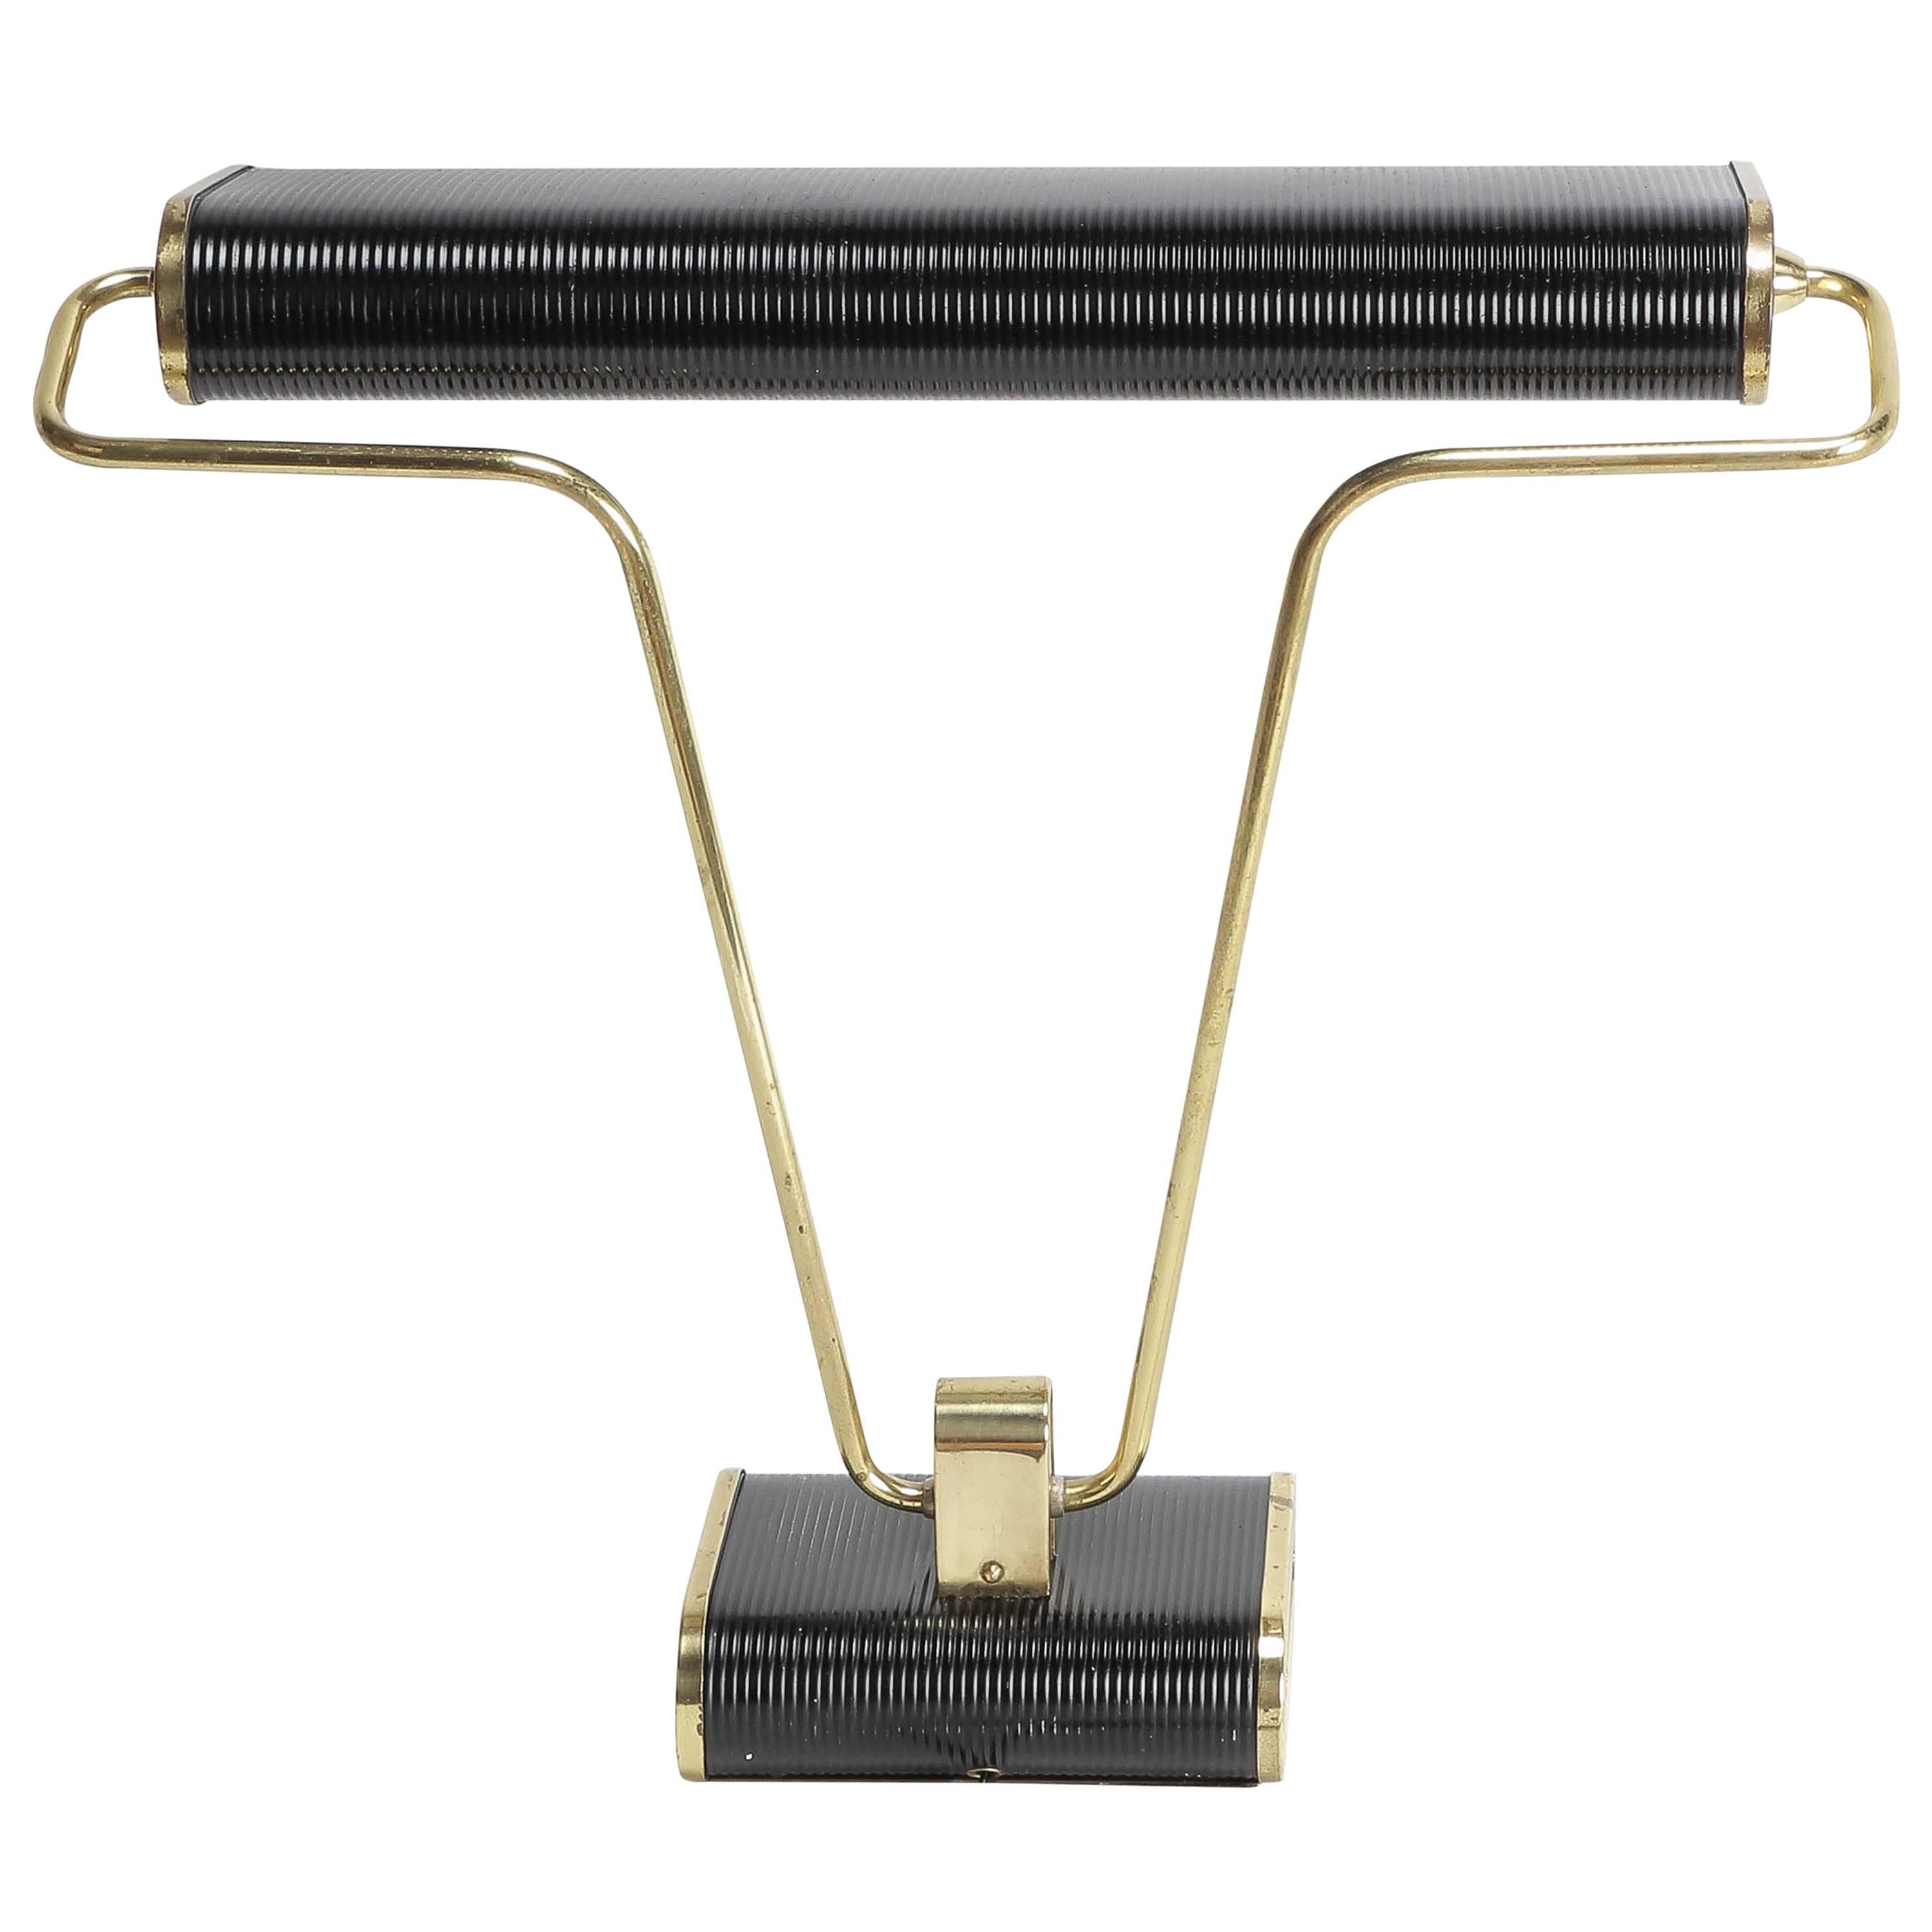 Eileen gray desk lamp for the French manufacturer jumo in the early 1940s. Adjustable arm and shade in black lacquered metal and brass. Two-light bayonet bulbs, switch is located on base.